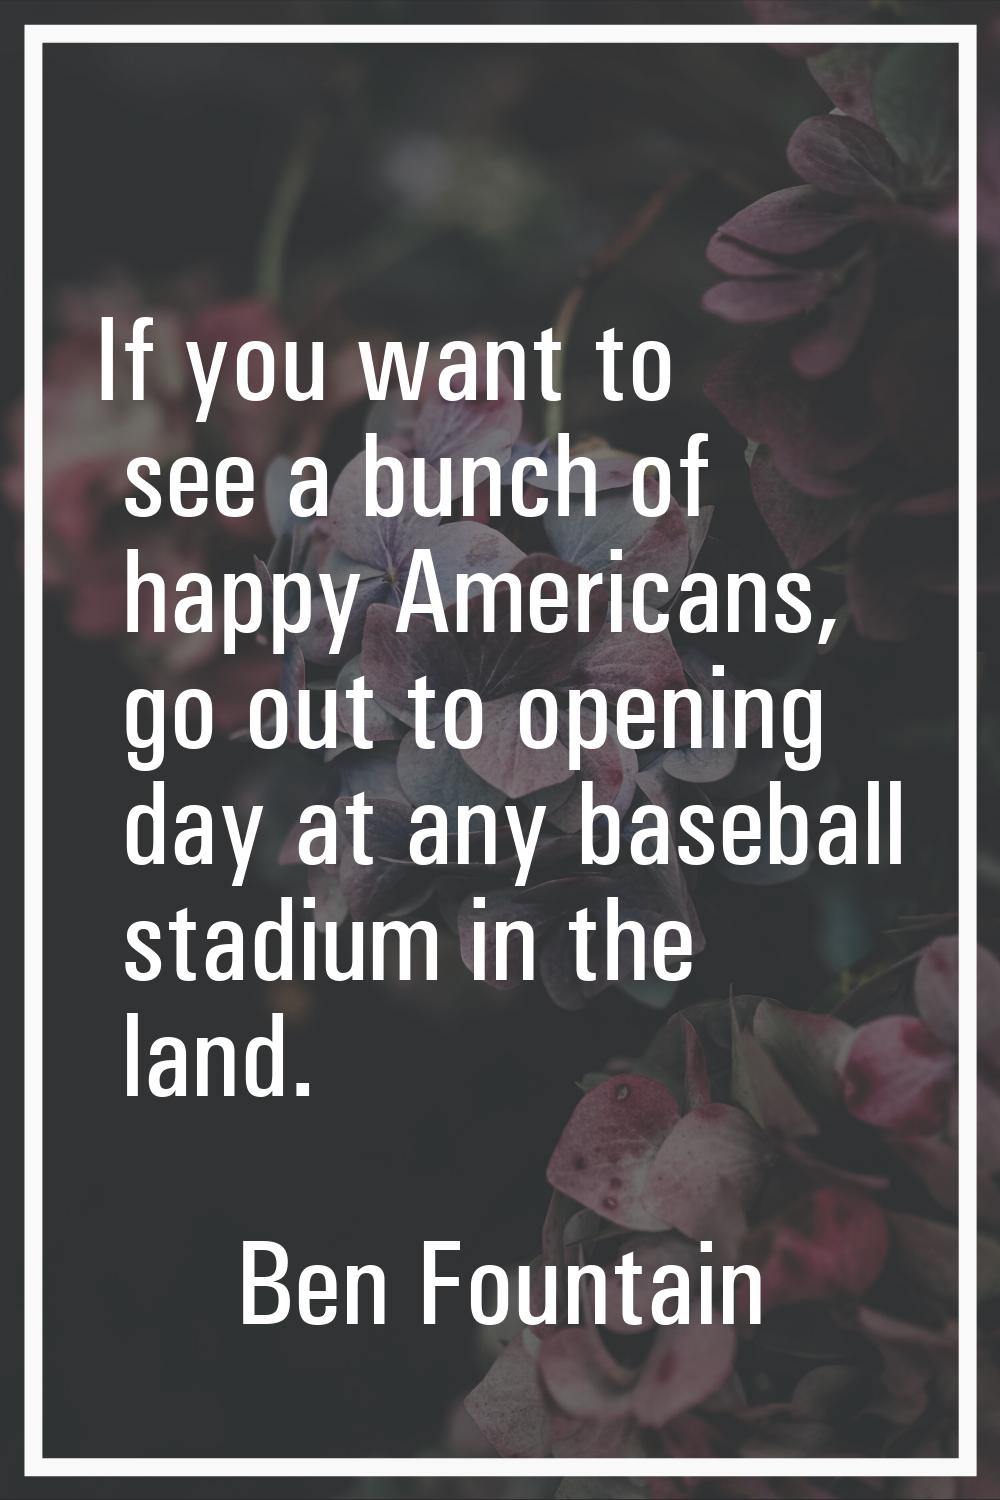 If you want to see a bunch of happy Americans, go out to opening day at any baseball stadium in the